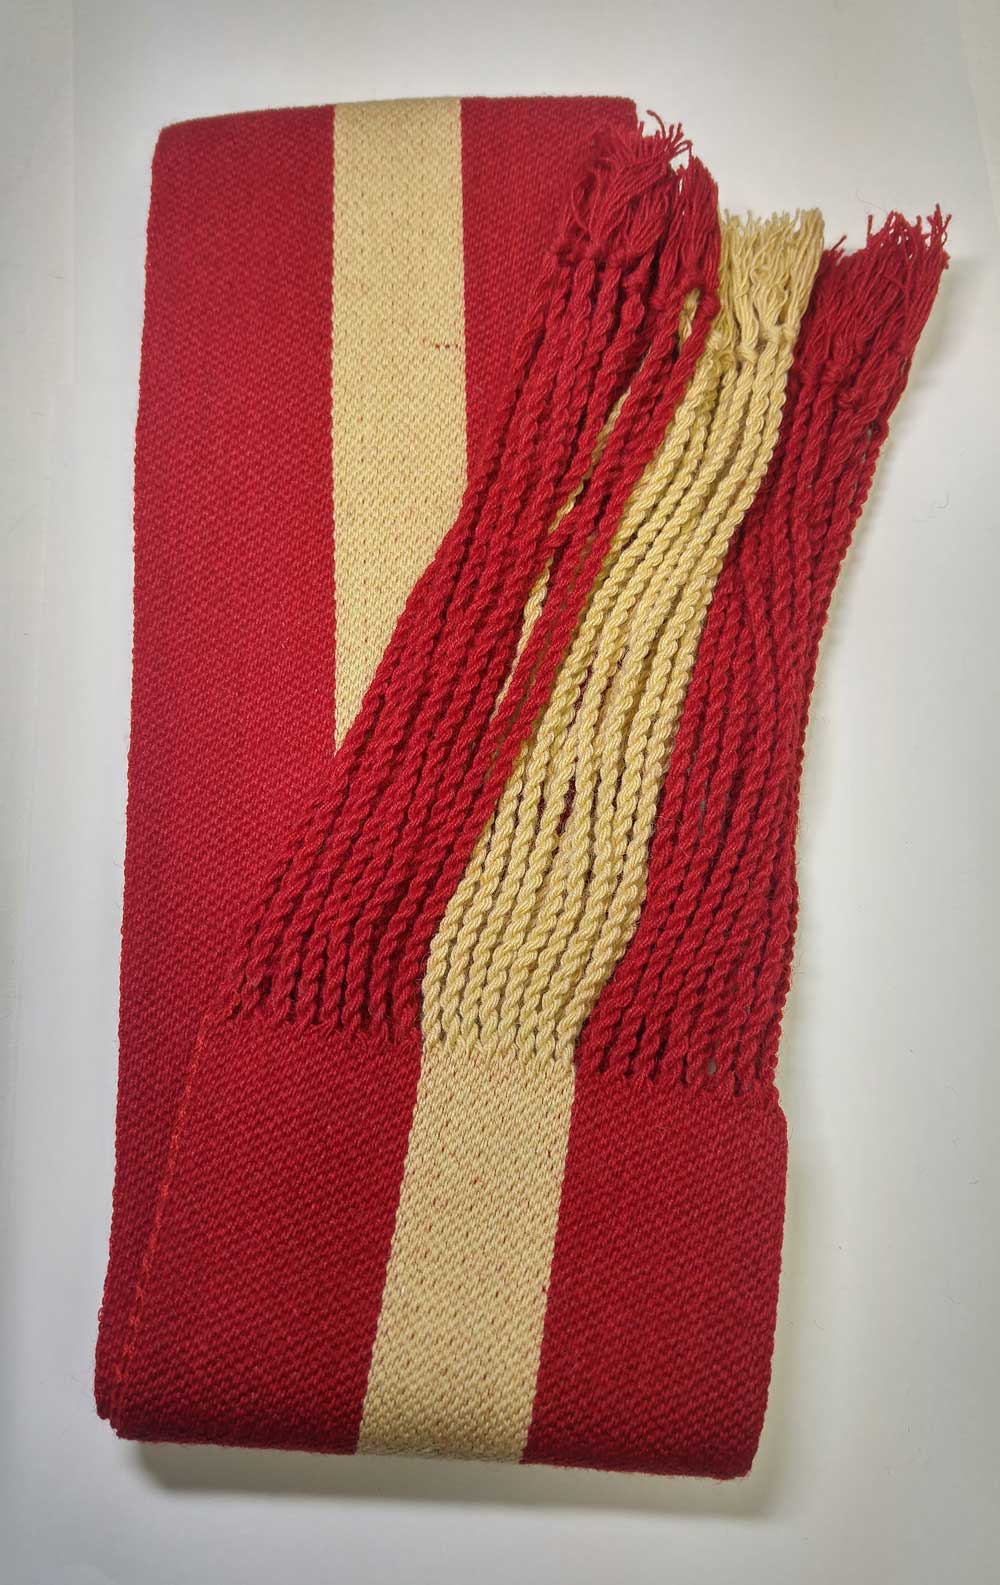 Sash: Sgt., Red with Buff Stripe, 18/19C